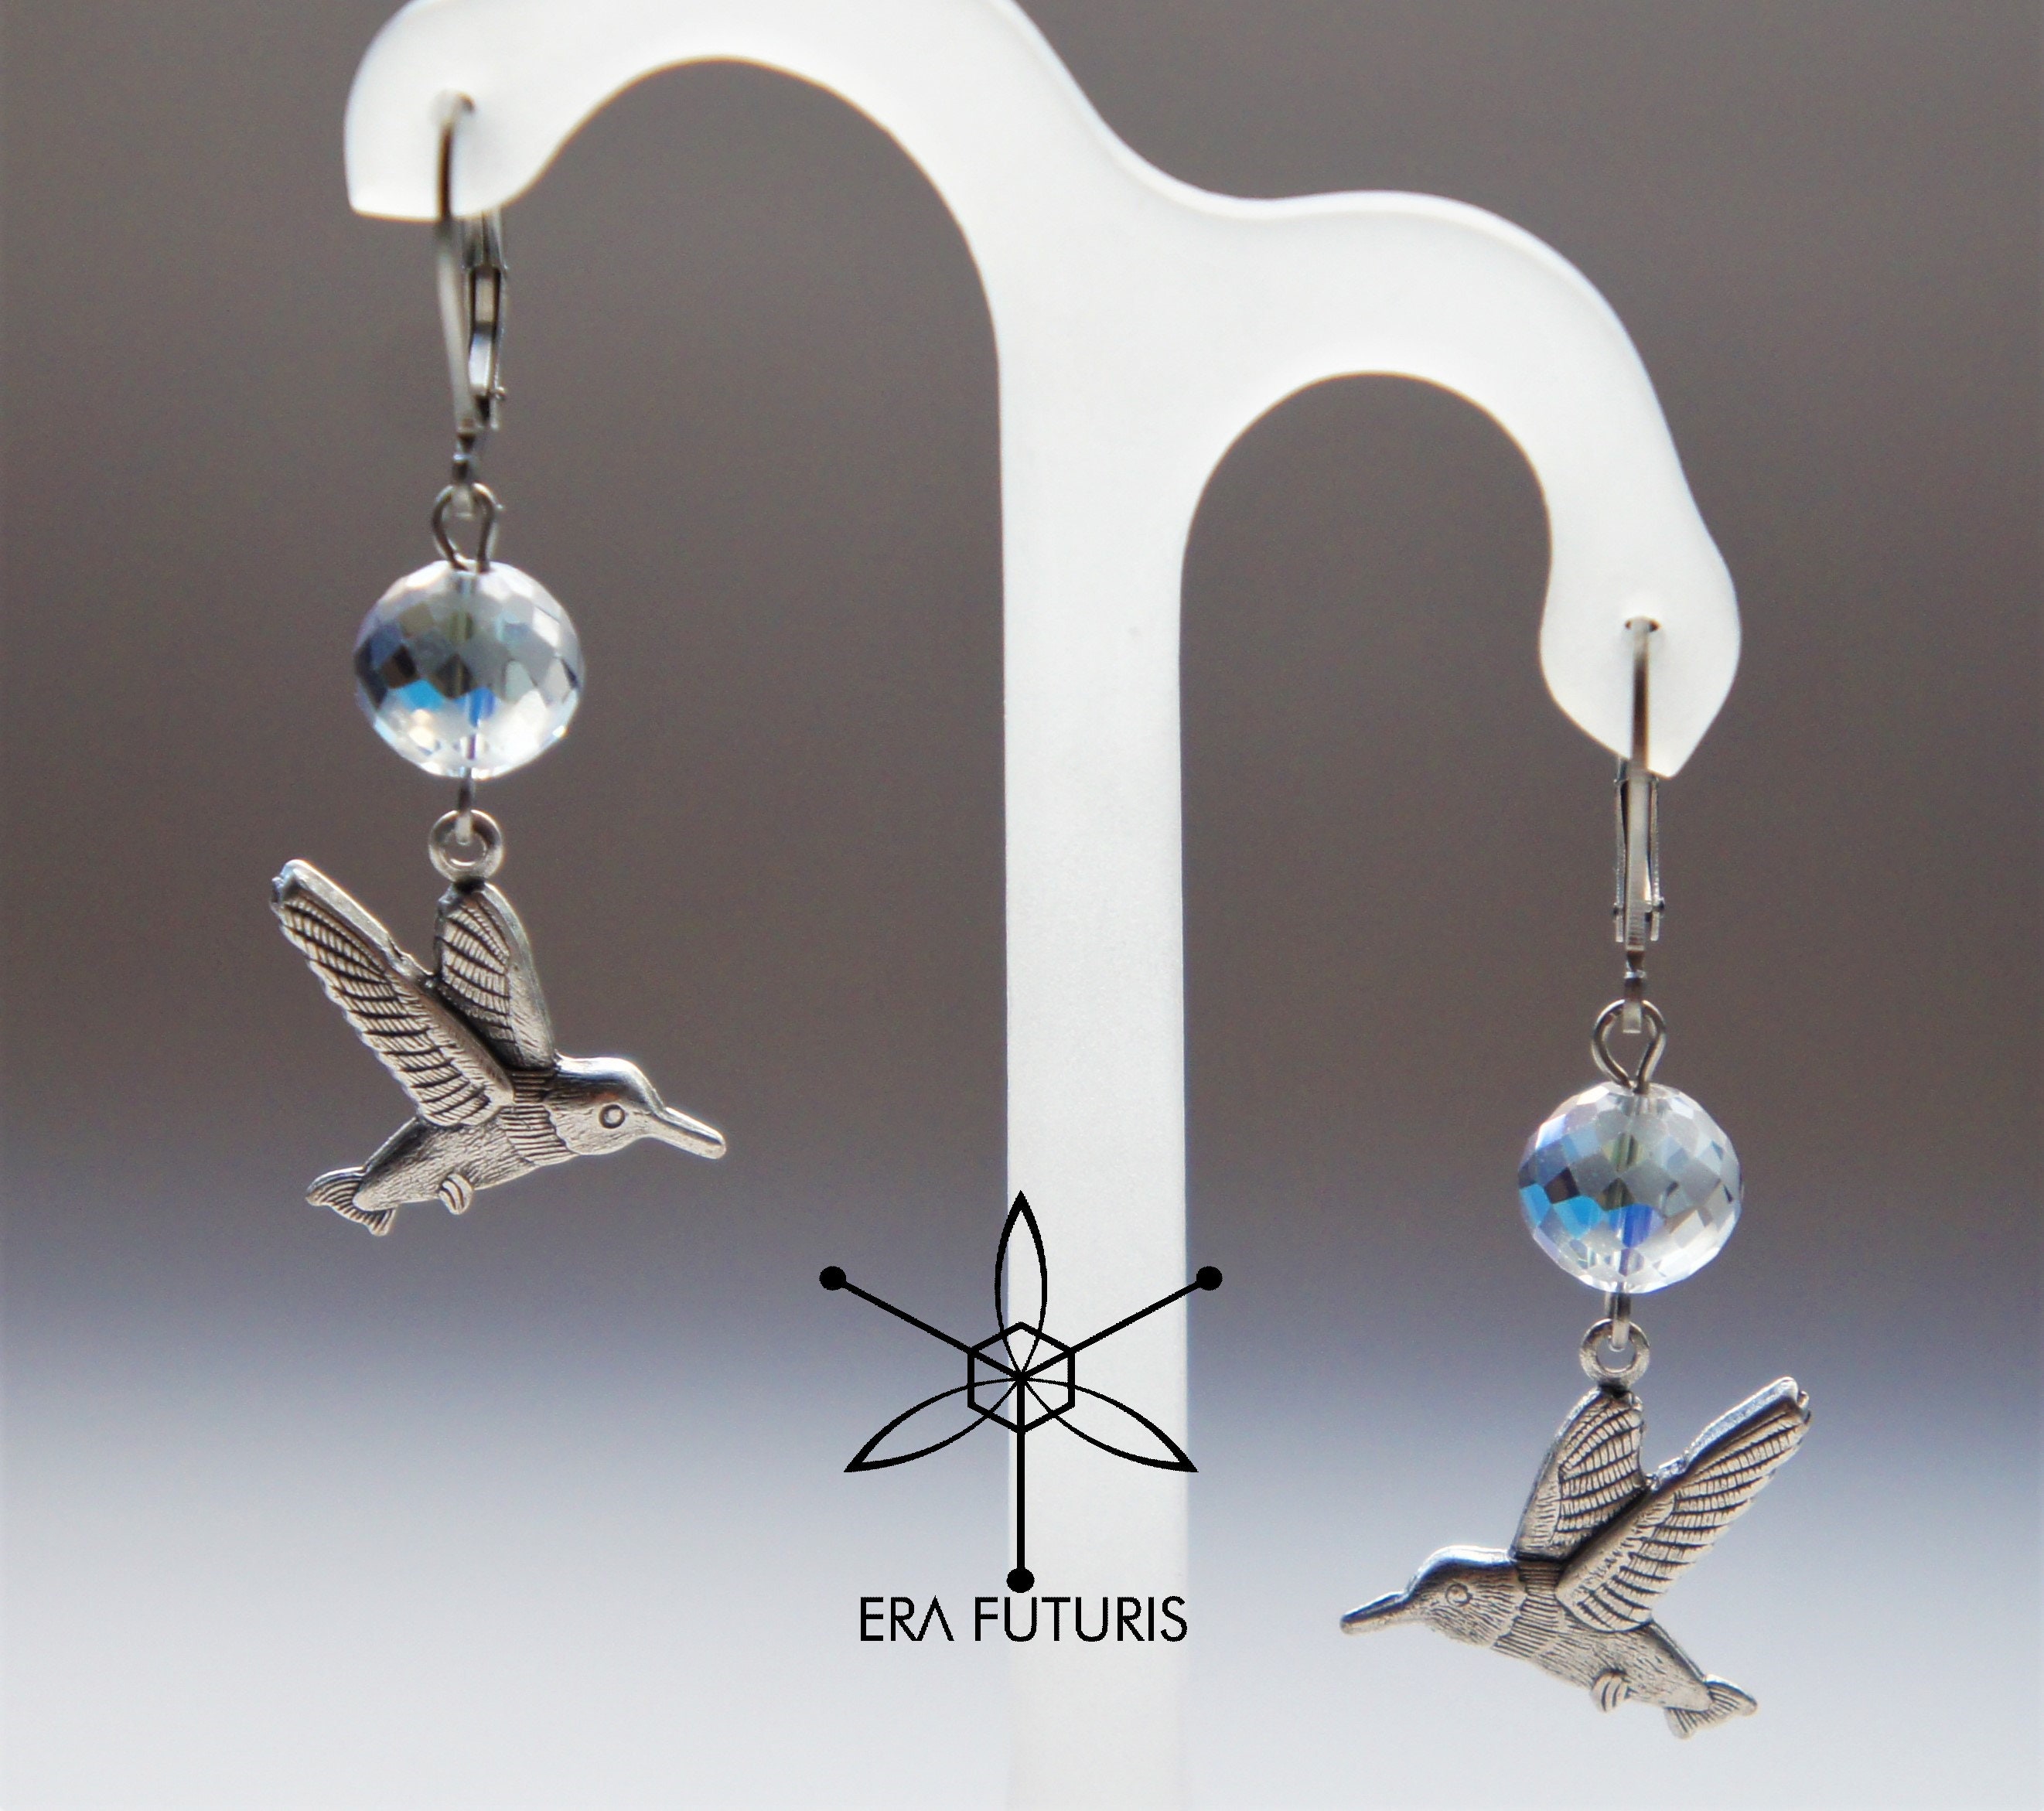 Little Bird Silver Earrings, Grey Colibri Earrings, Small Hummingbird  Earrings, Silver Bird Earrings, Gift for Her, Christmas Present - Etsy